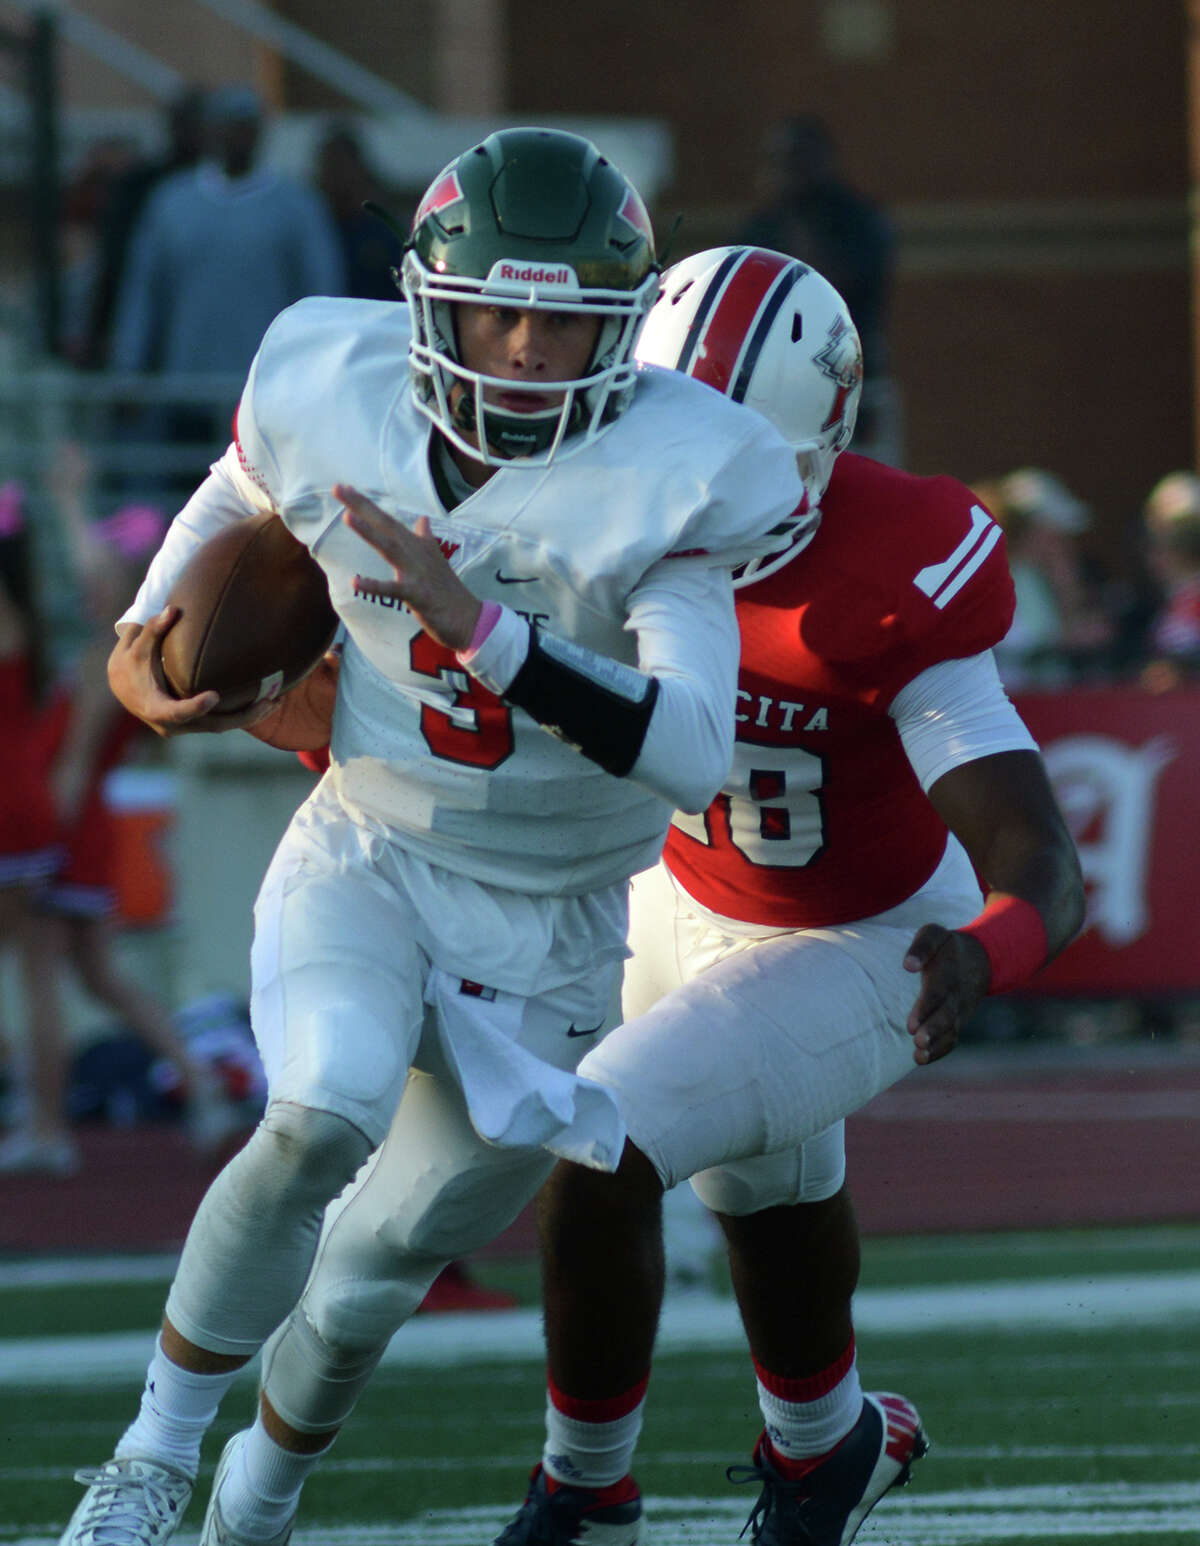 The Woodlands junior quarterback Eric Schmid (3) outruns Atascocita senior linebacker Andre Mickles Jr. during 1st quarter action of their District 16-6A matchup at Turner Stadium in Humble on Saturday, Oct. 3, 2015. (Photo by Jerry Baker/Freelance)